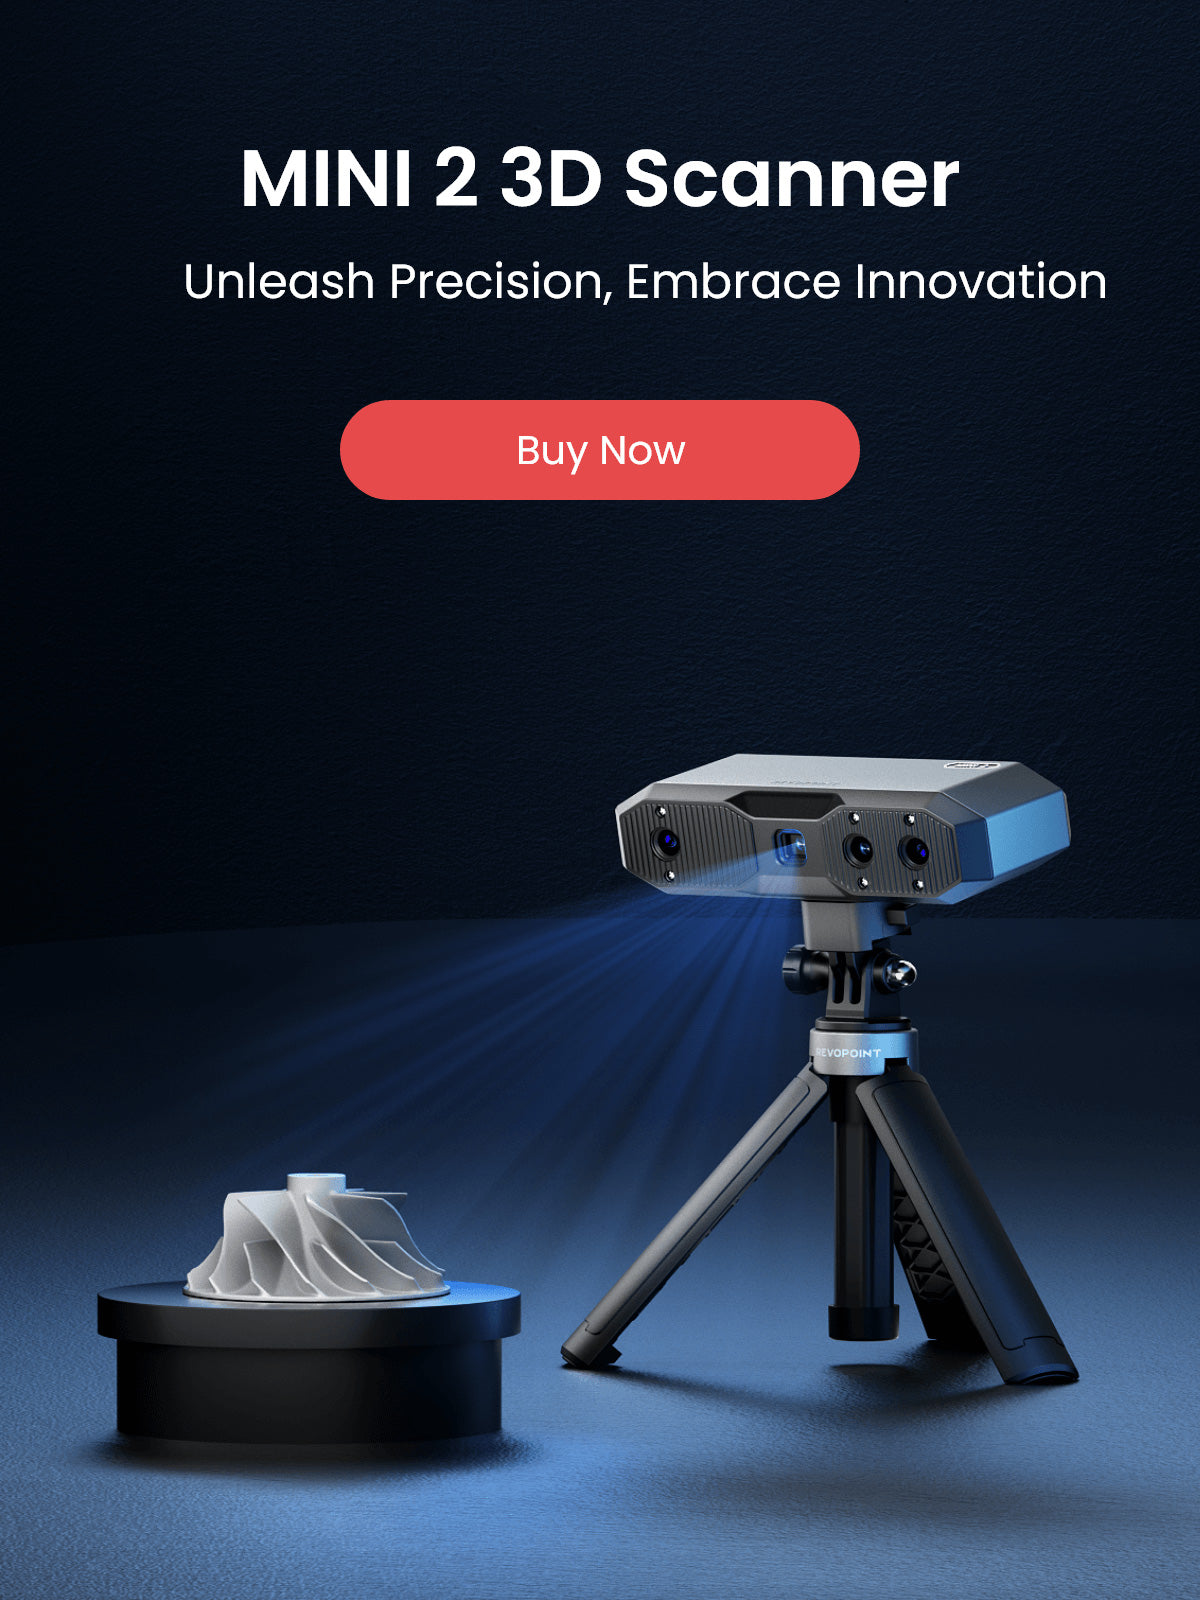 Best 3D Scanners for 3D Scanning Solution - Revopoint 3D